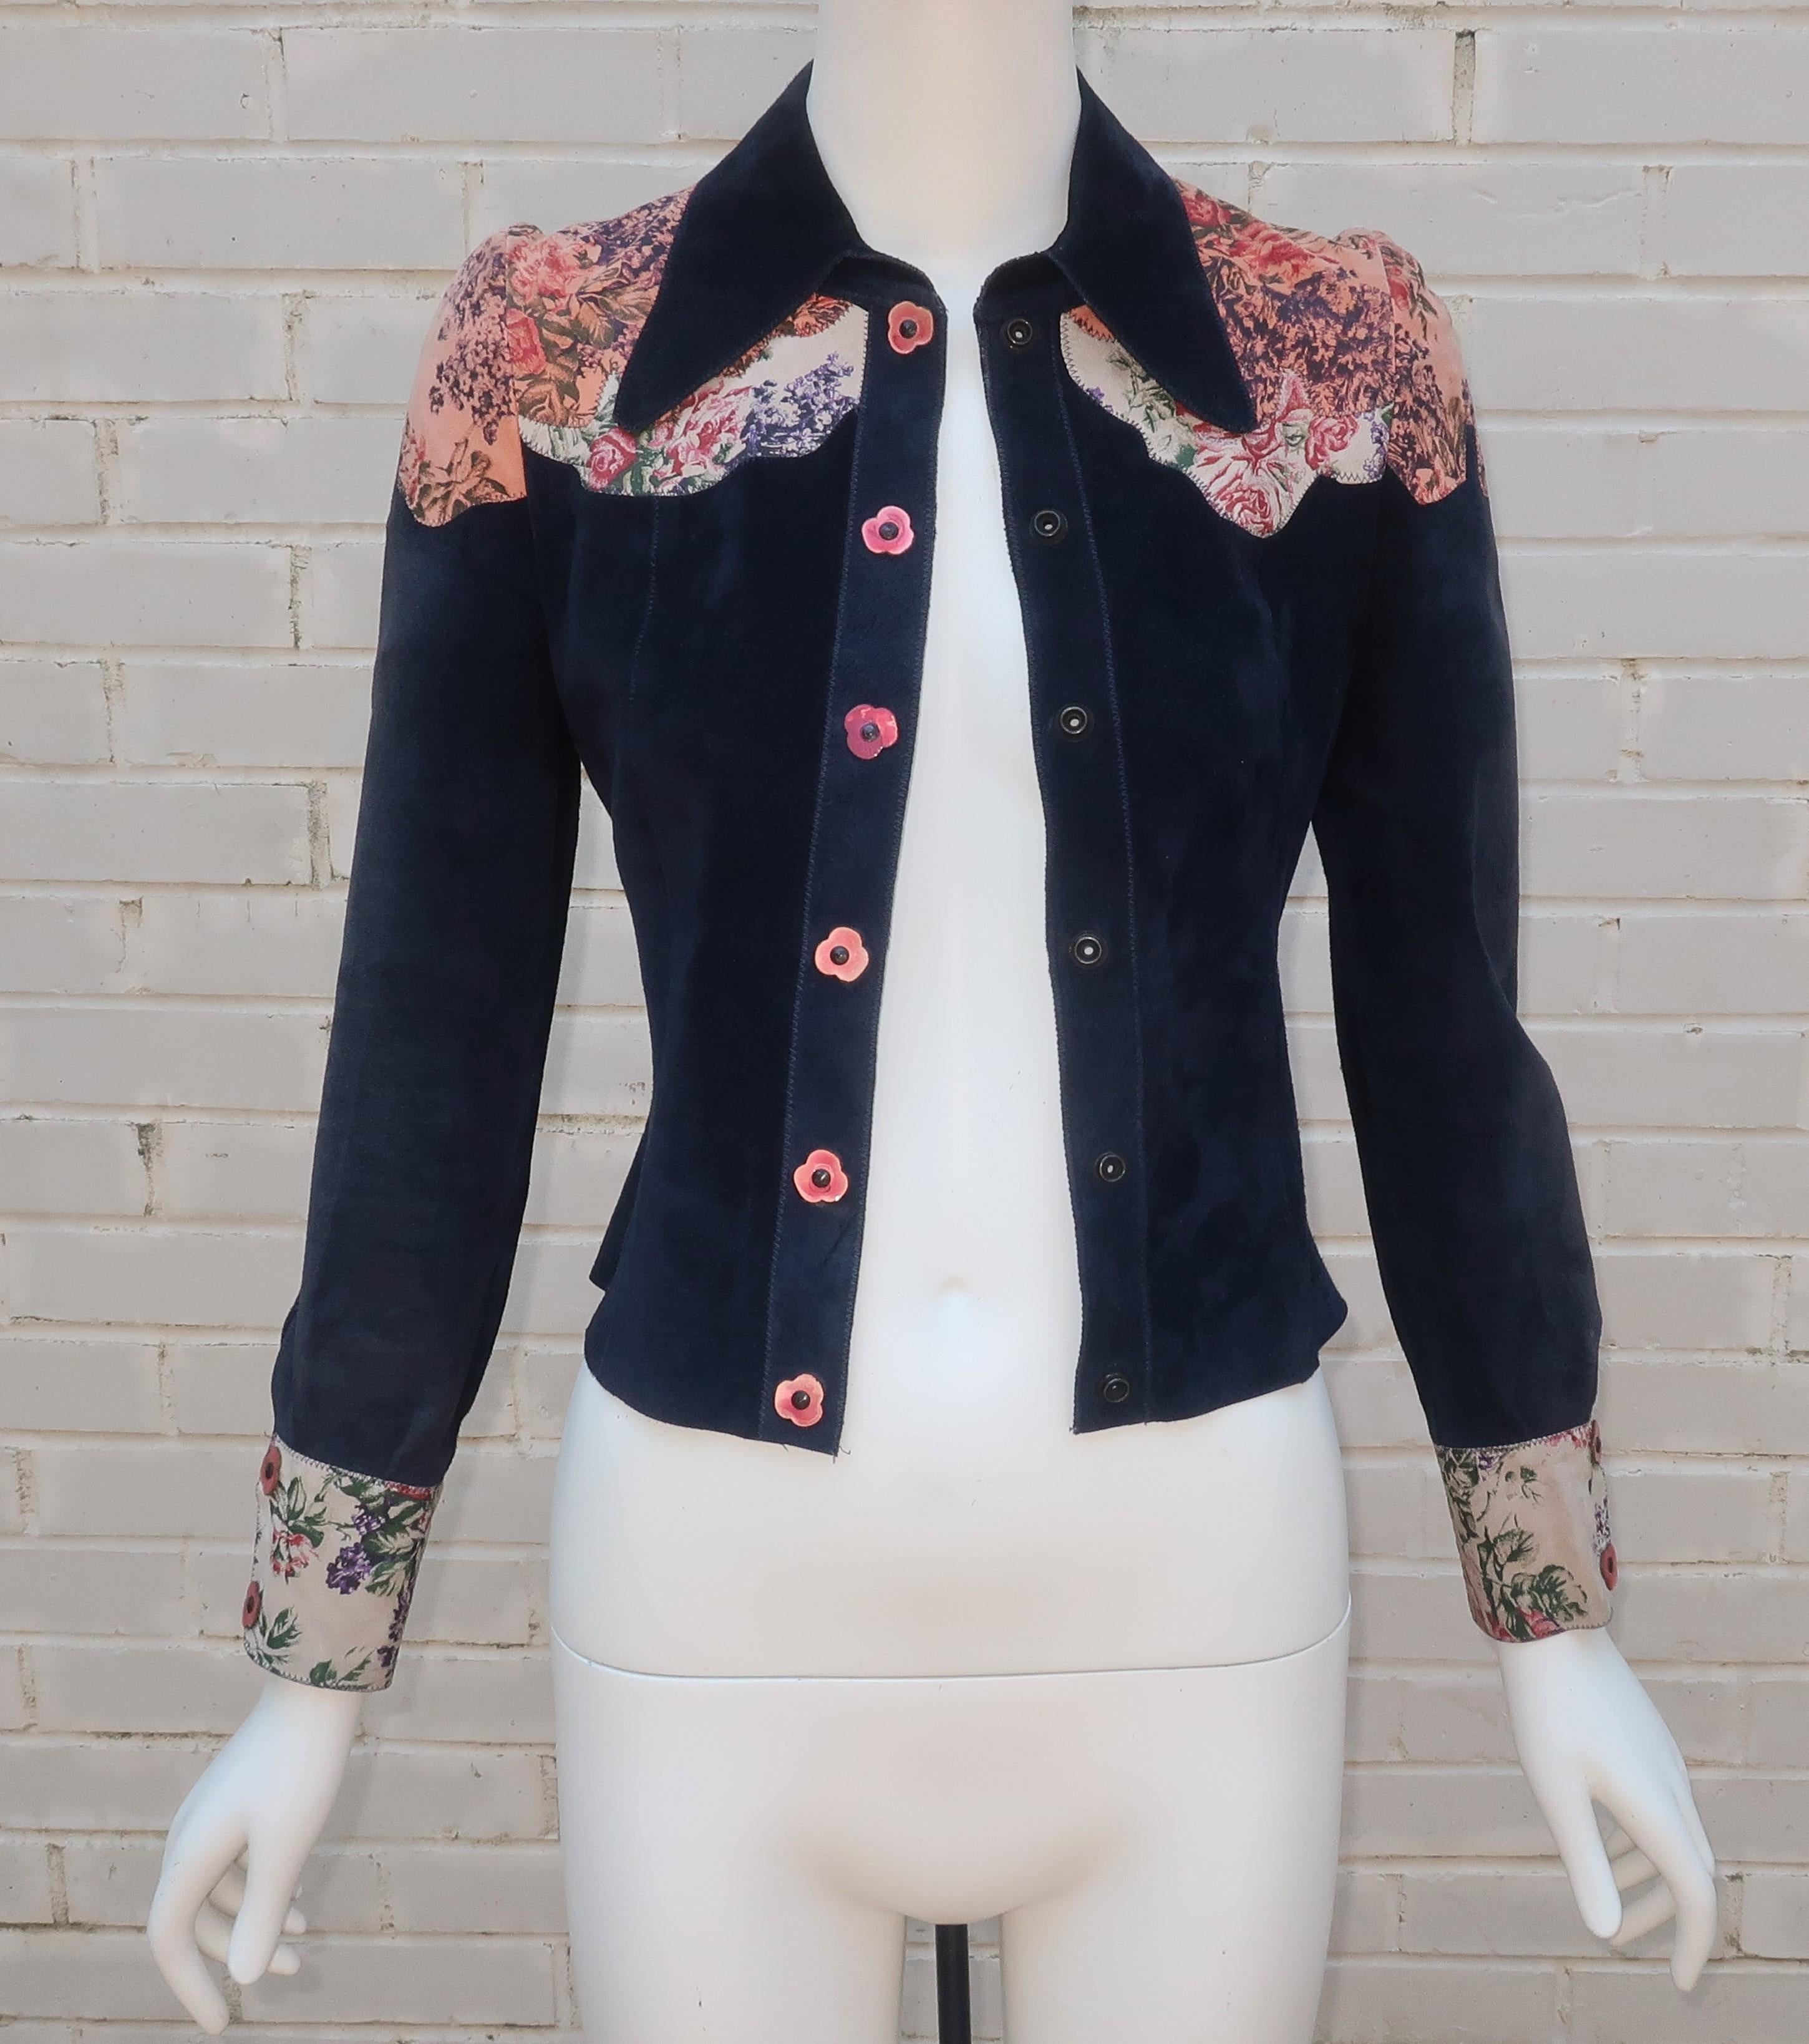 Roberto Cavalli Blue Suede Patchwork Printed Leather Jacket & Skirt, 1970's For Sale 4